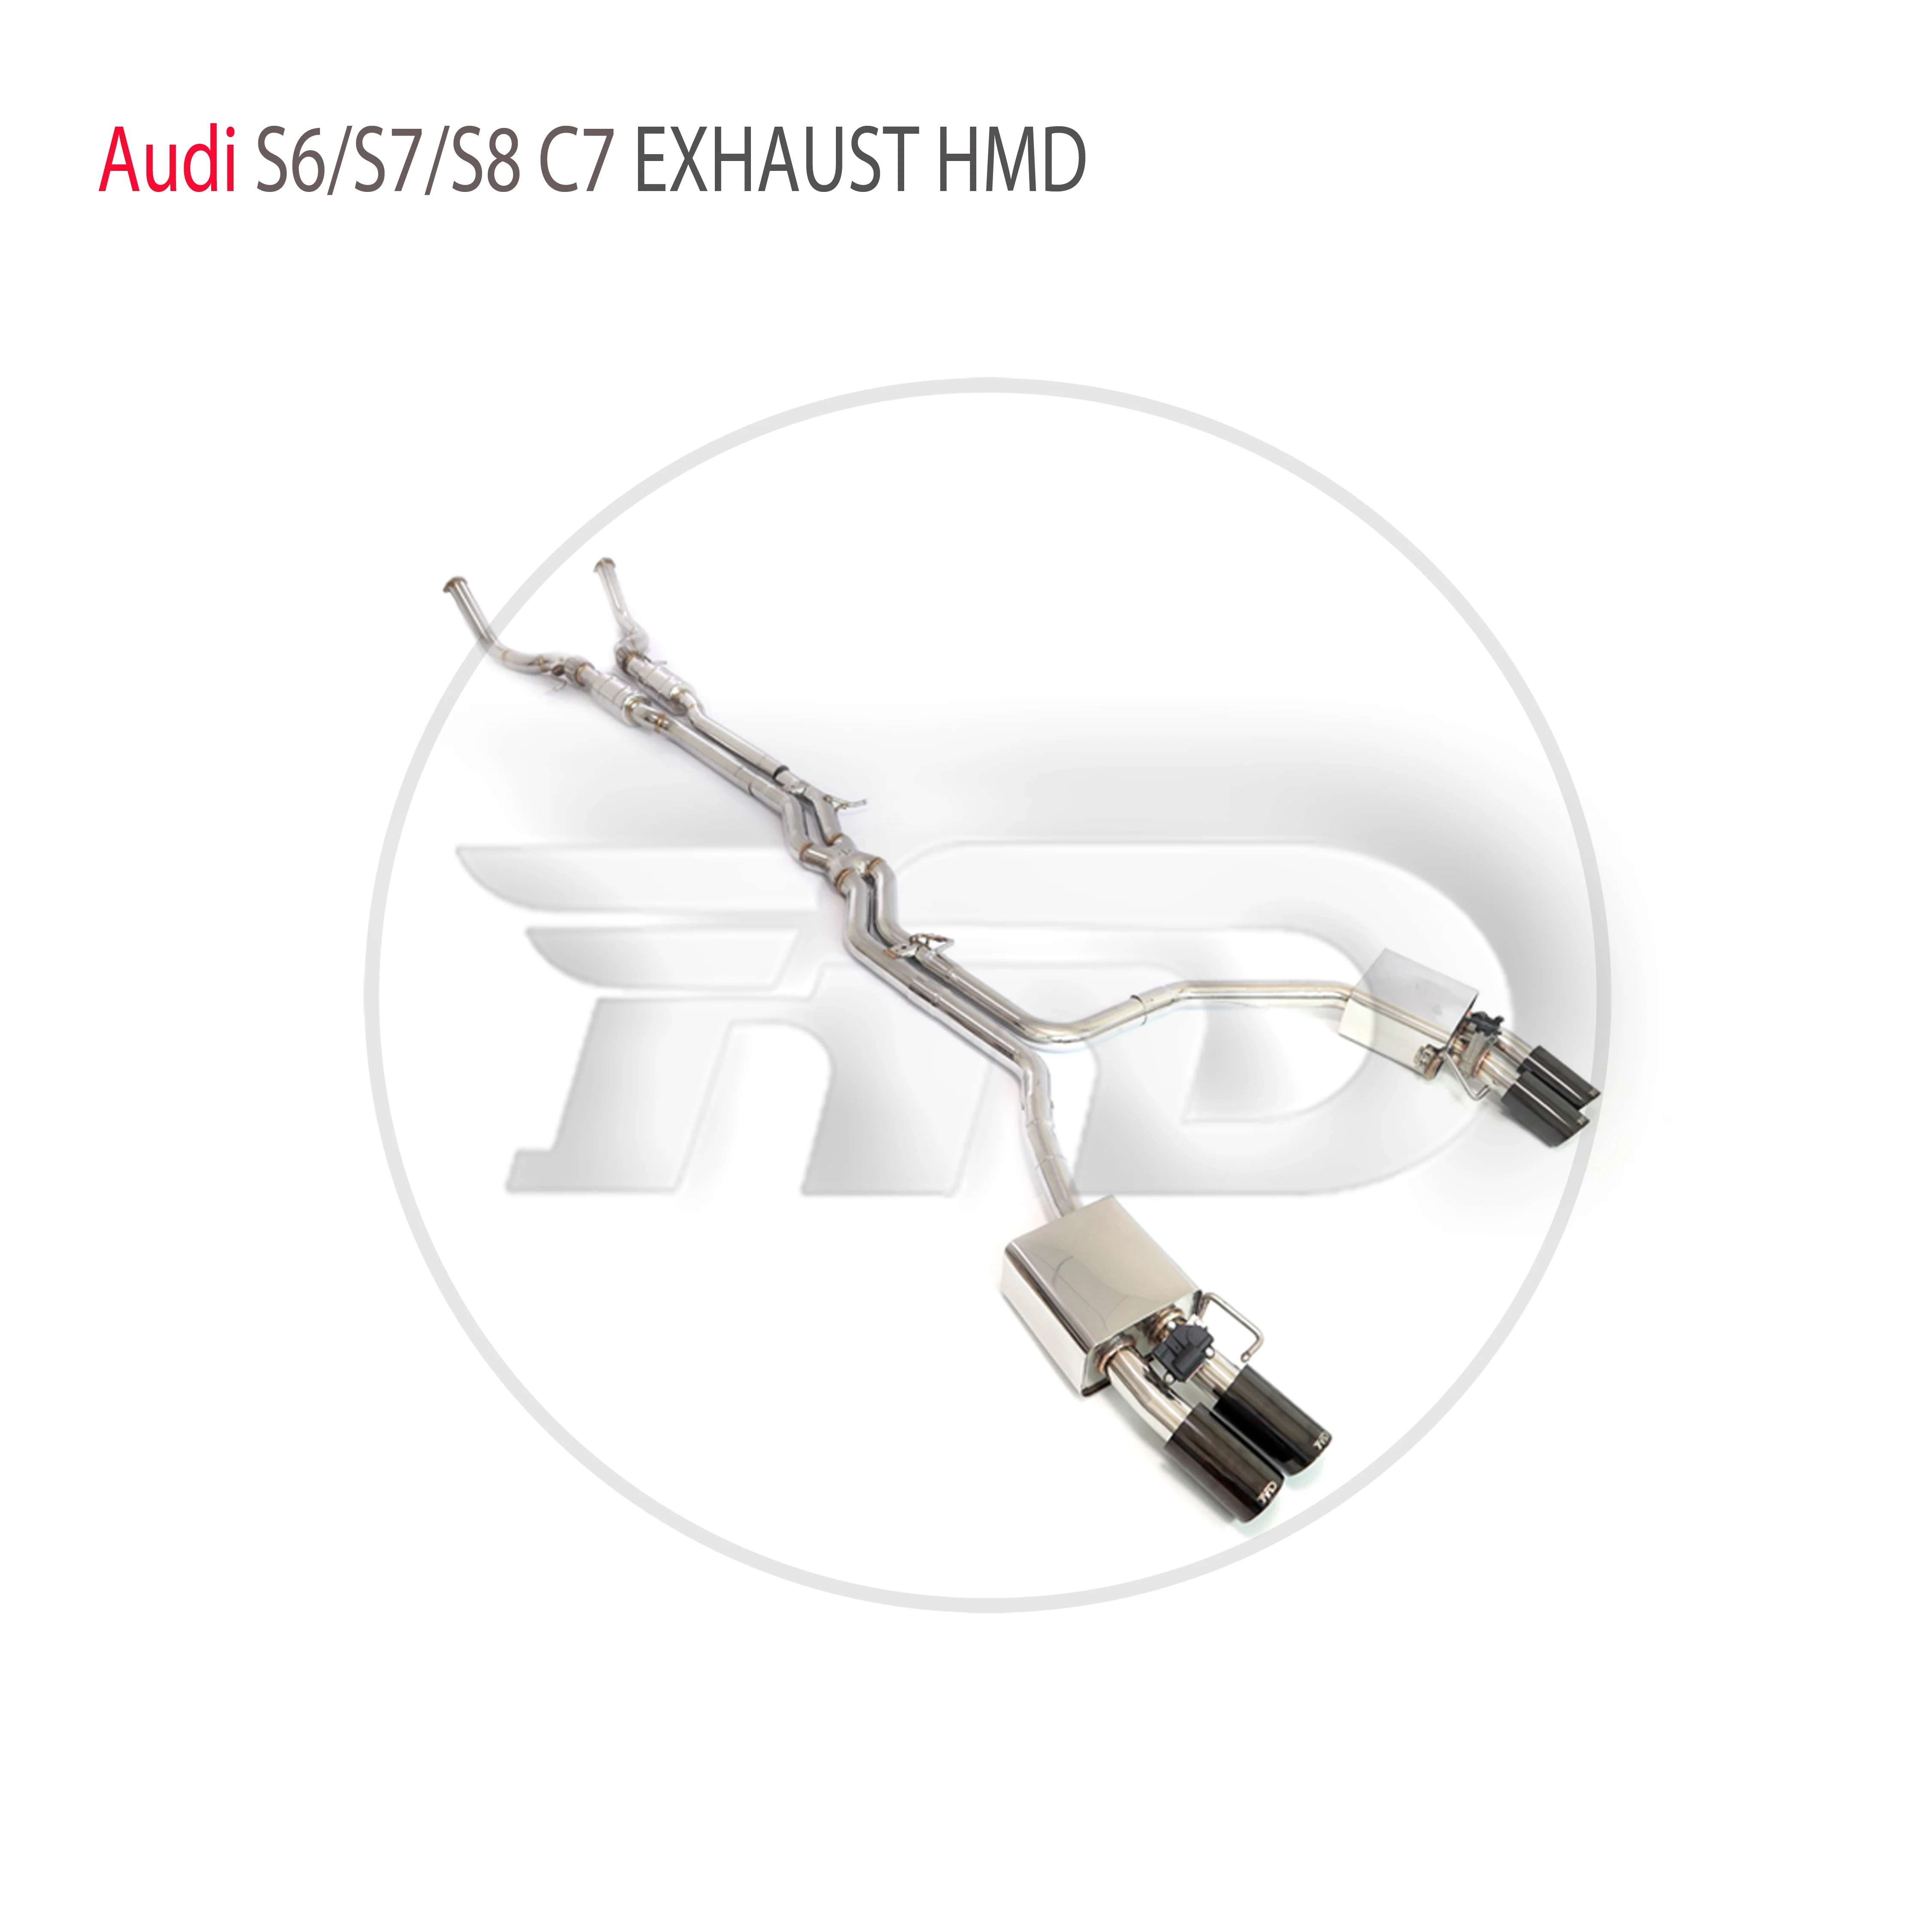 

HMD Stainless Steel Exhaust System Performance Catback for Audi S6 S7 S8 C7 Electronic Valve Muffler Pre-silencer Race Pipe